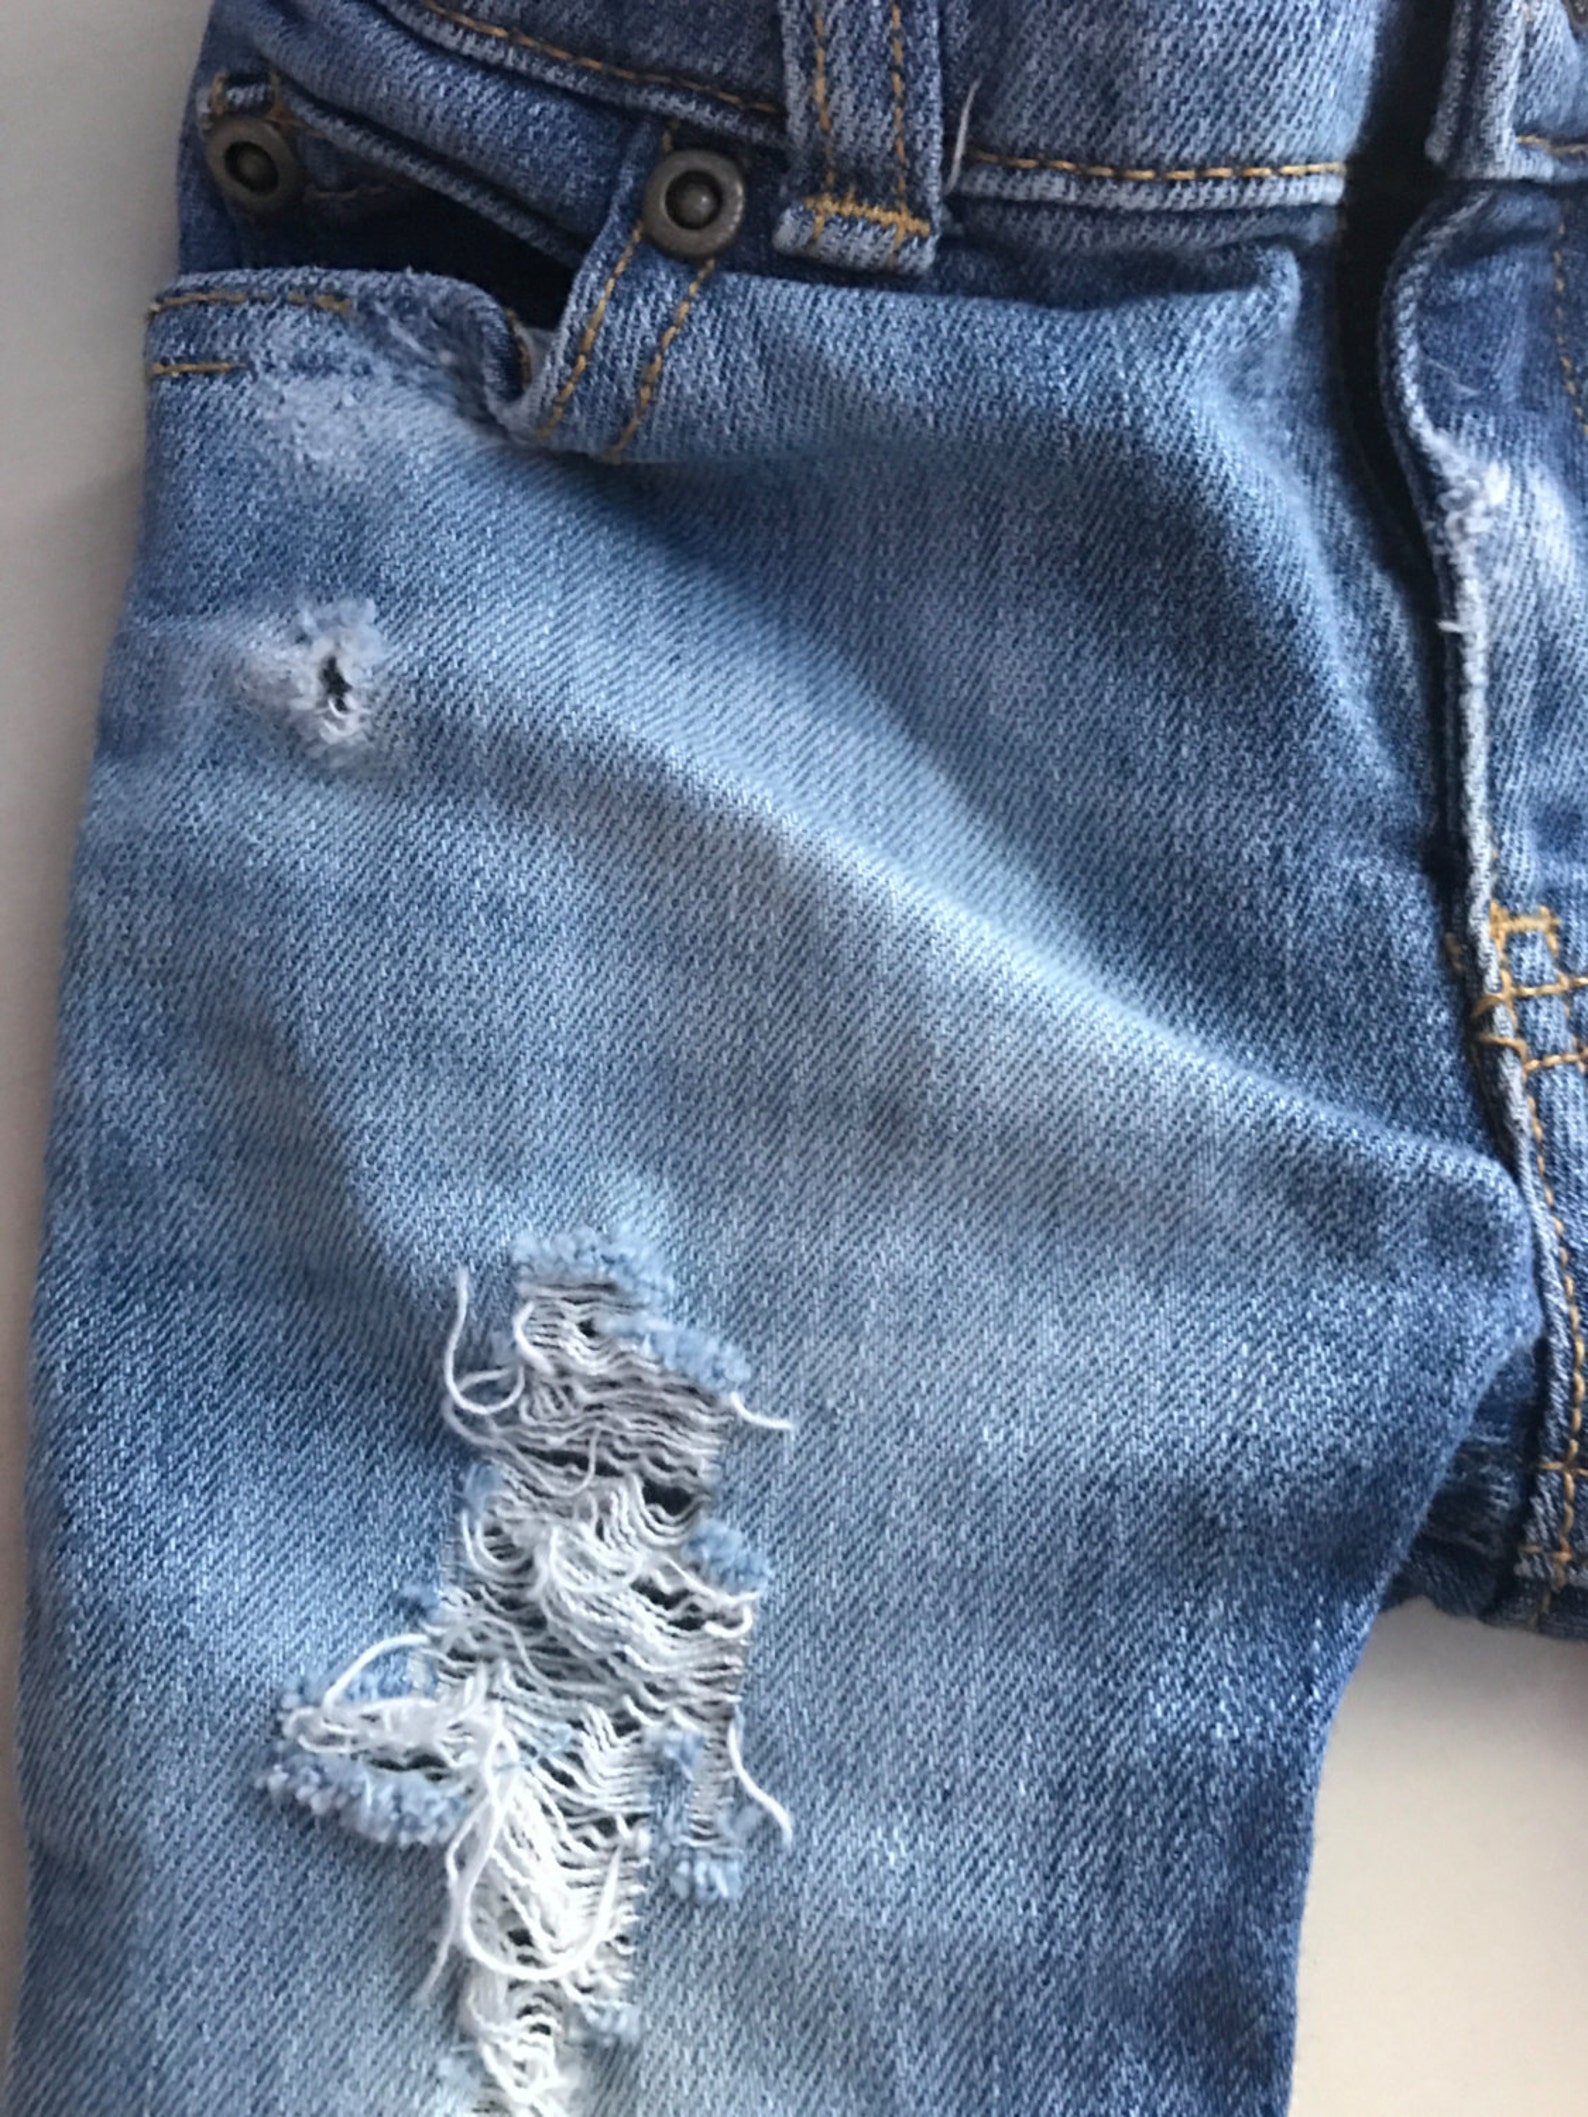 All Torn up Unisex Jeans Distressed Jeans With Rips and - Etsy